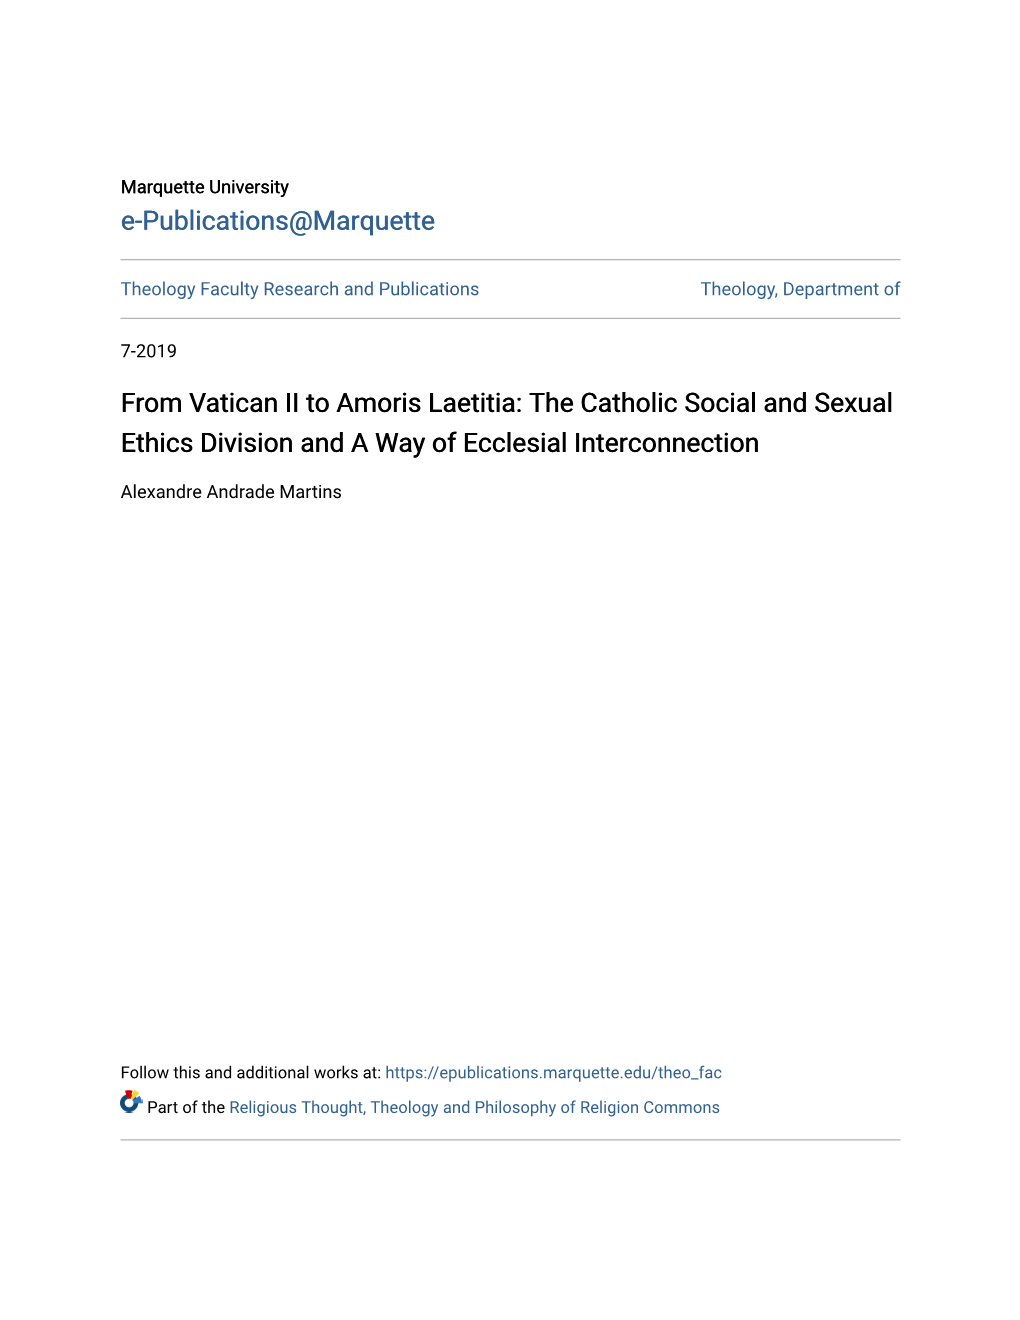 From Vatican II to Amoris Laetitia: the Catholic Social and Sexual Ethics Division and a Way of Ecclesial Interconnection